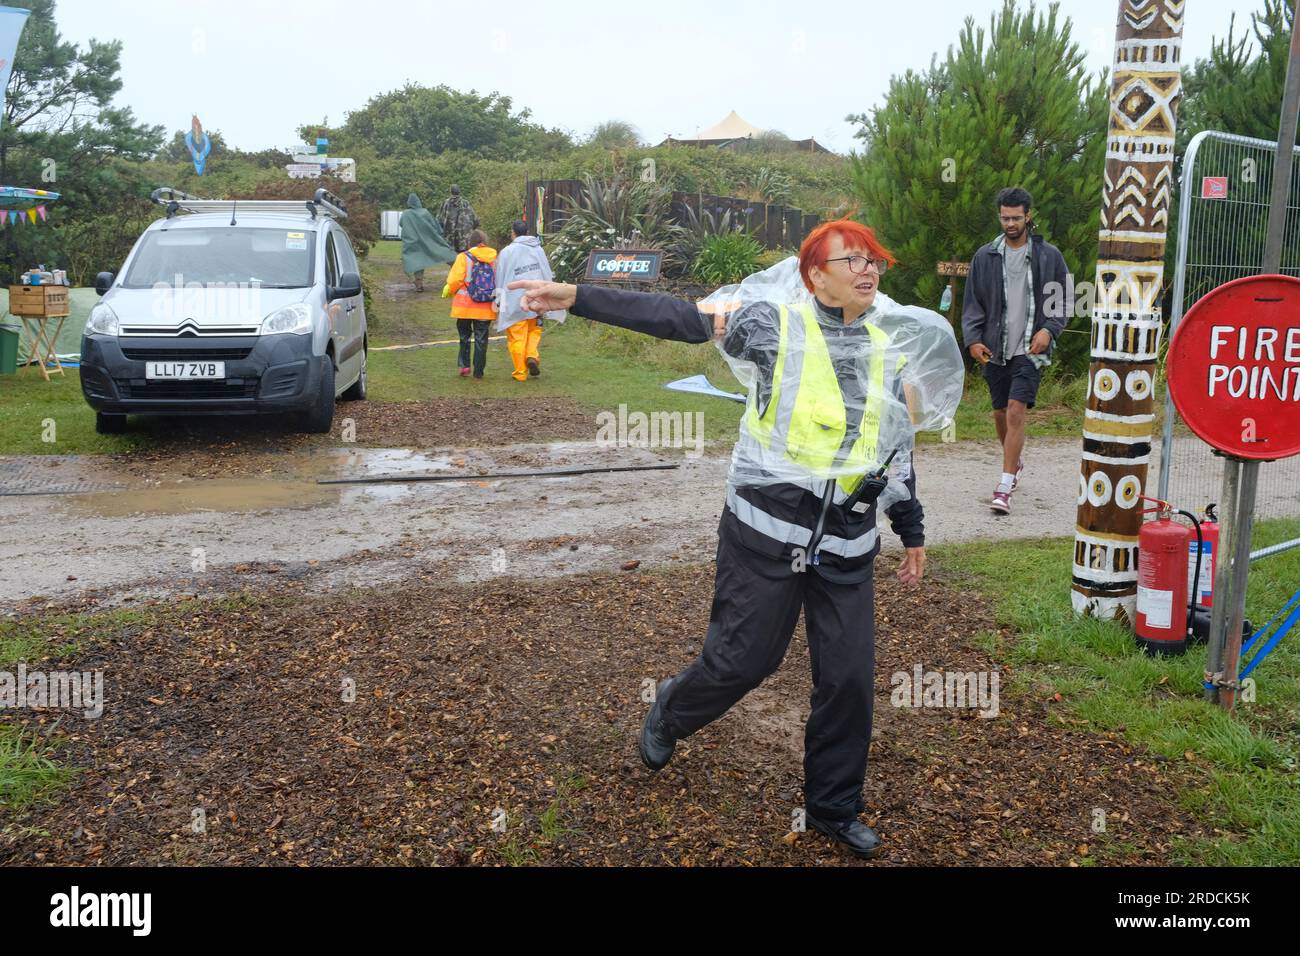 A festival worker directing traffic in bad weather. Stock Photo